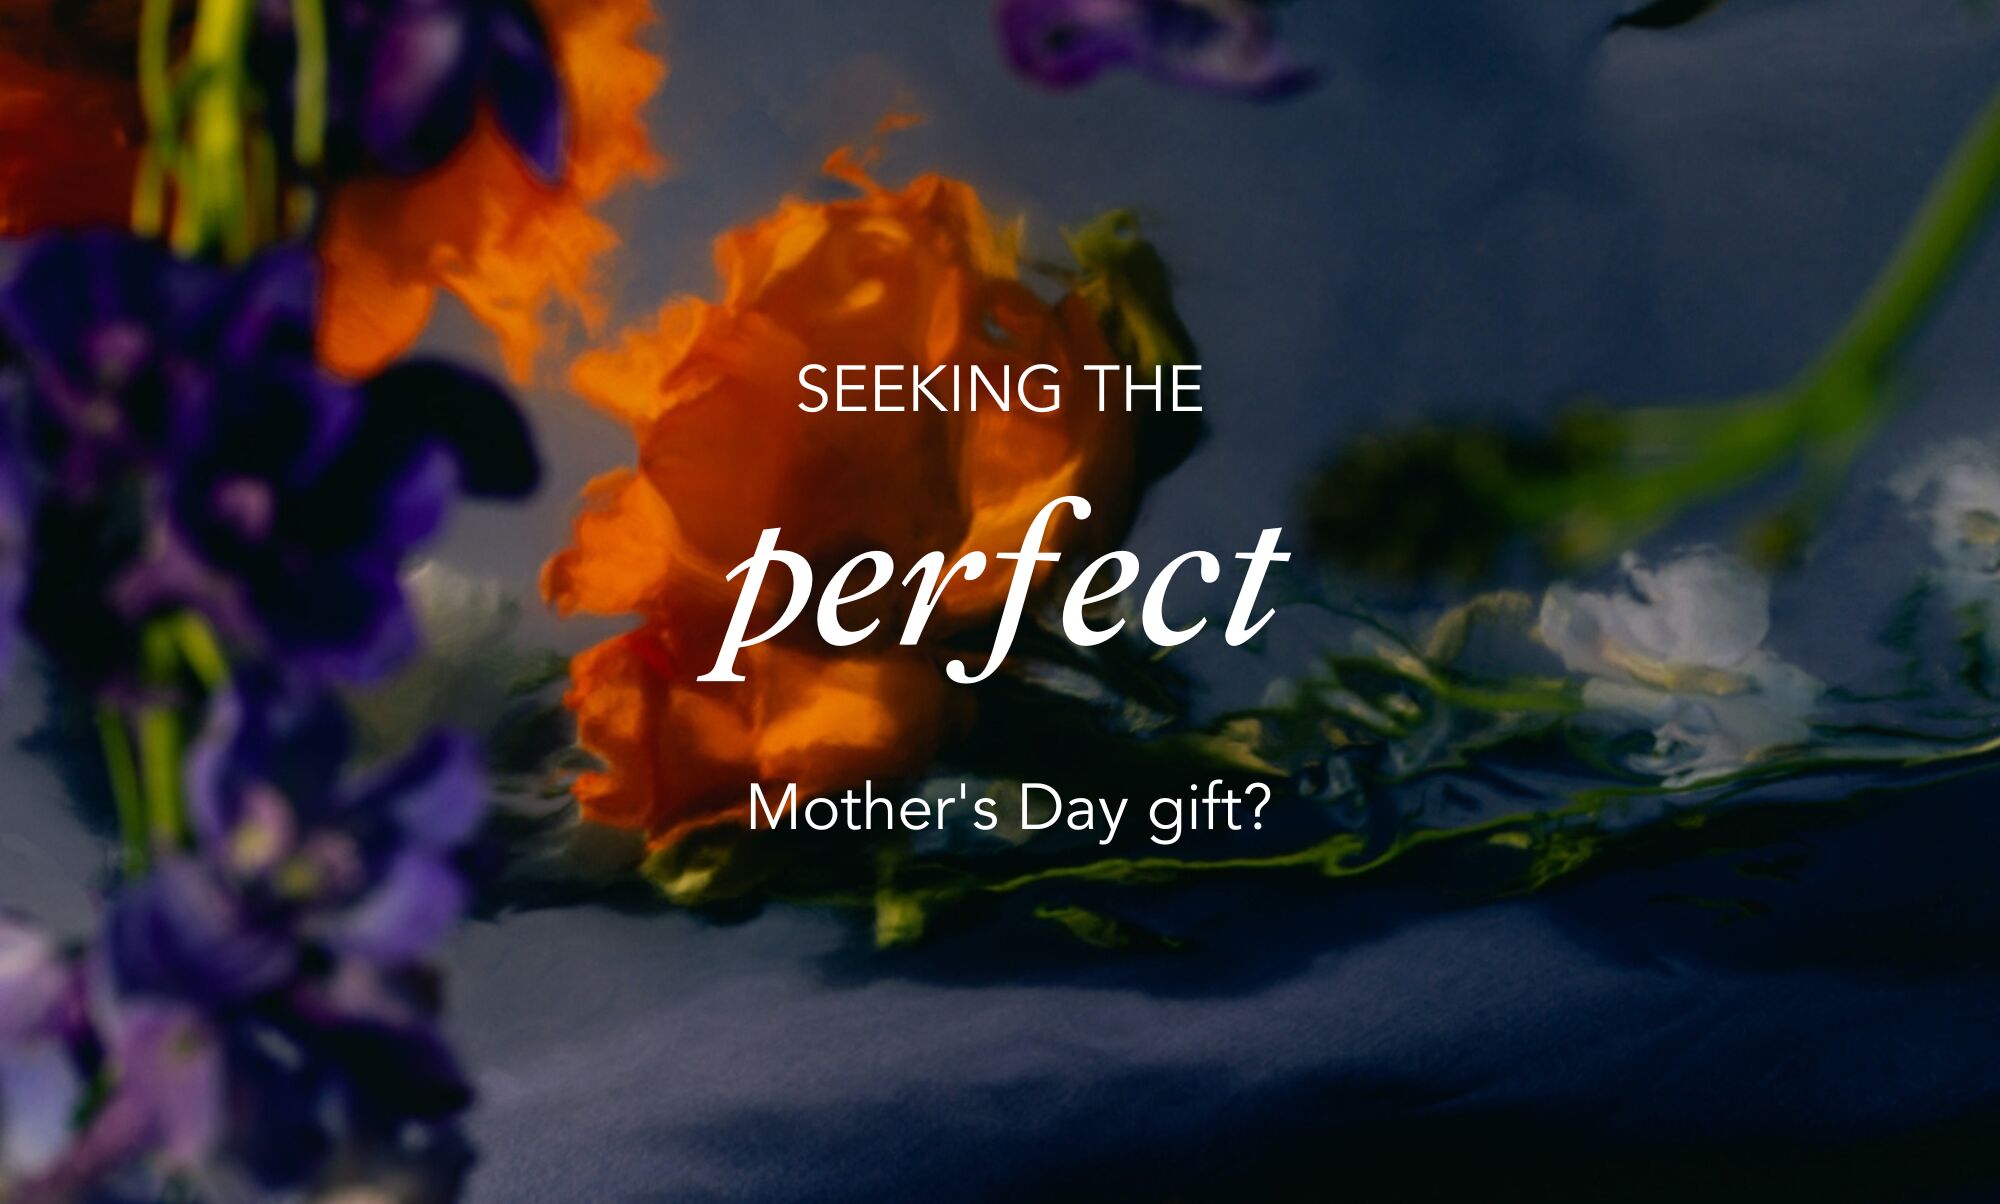 Seeking the perfect Mother's Day gift?